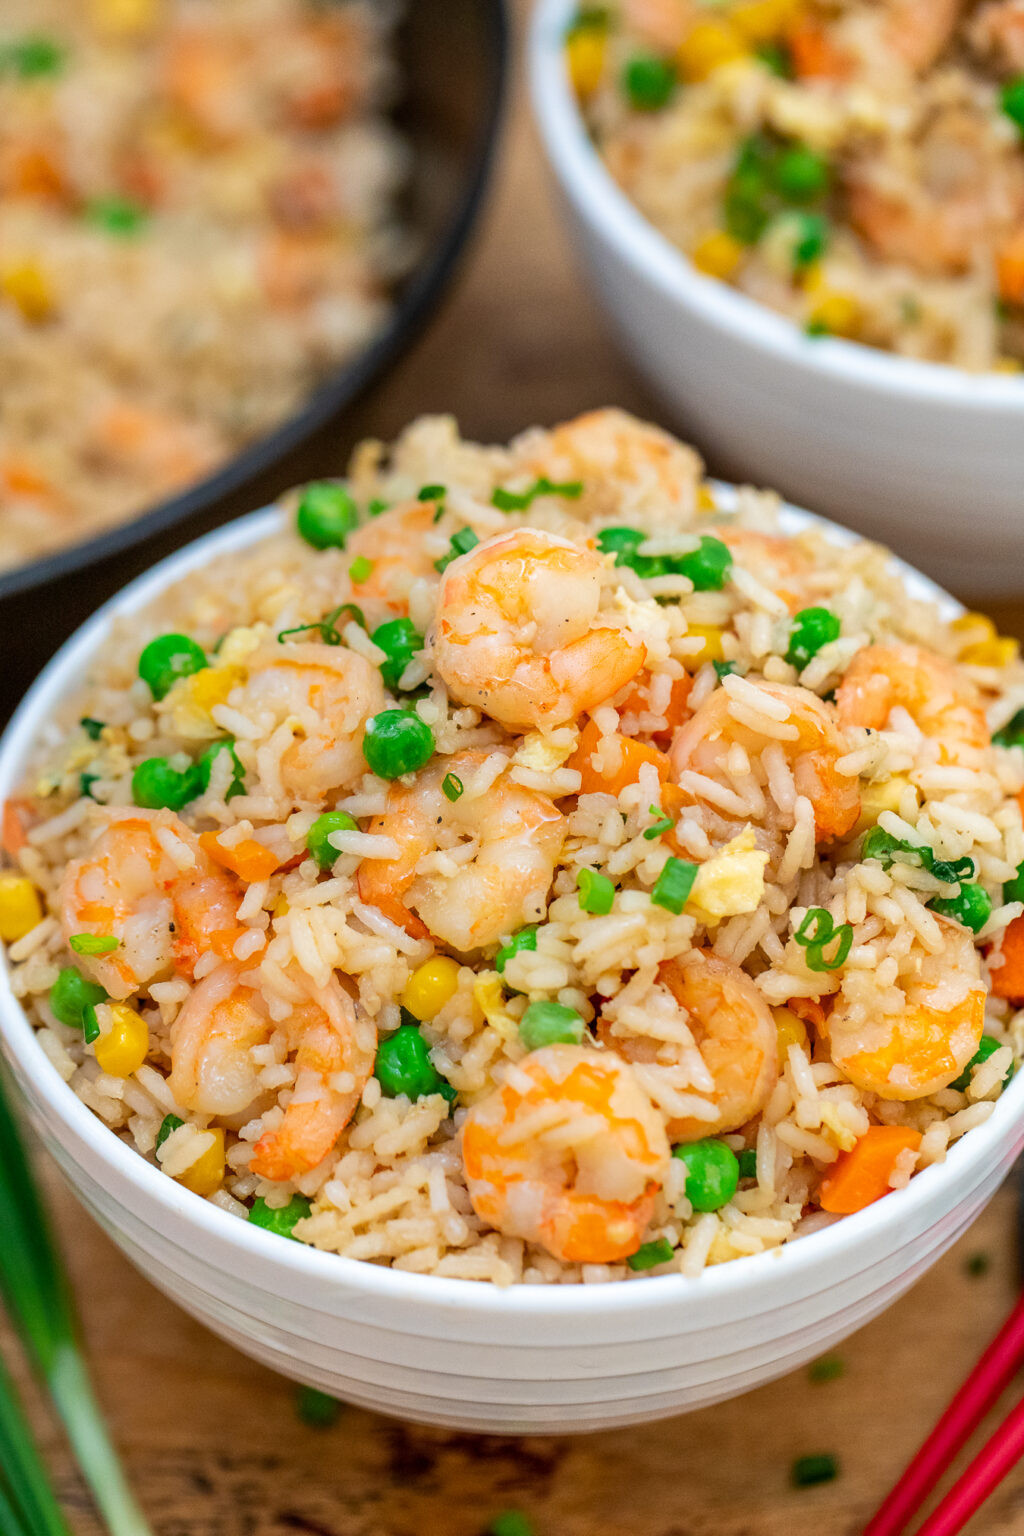 Fried Rice and Shrimp Beautiful Shrimp Fried Rice Recipe [video] Sweet and Savory Meals